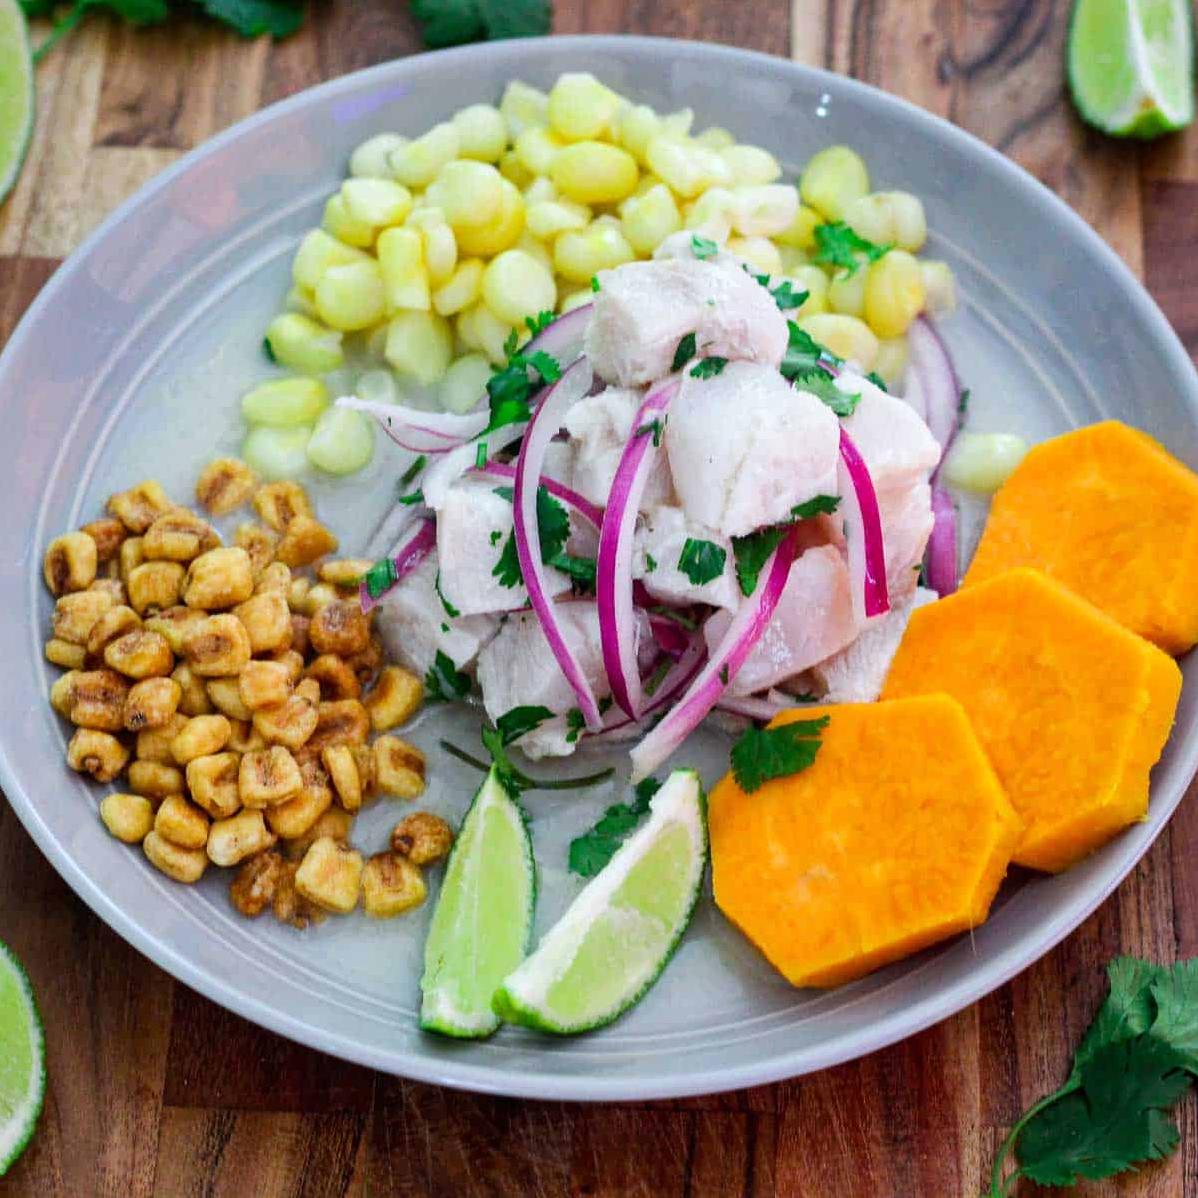  The combination of citrus juices brings a burst of flavor to the ceviche.